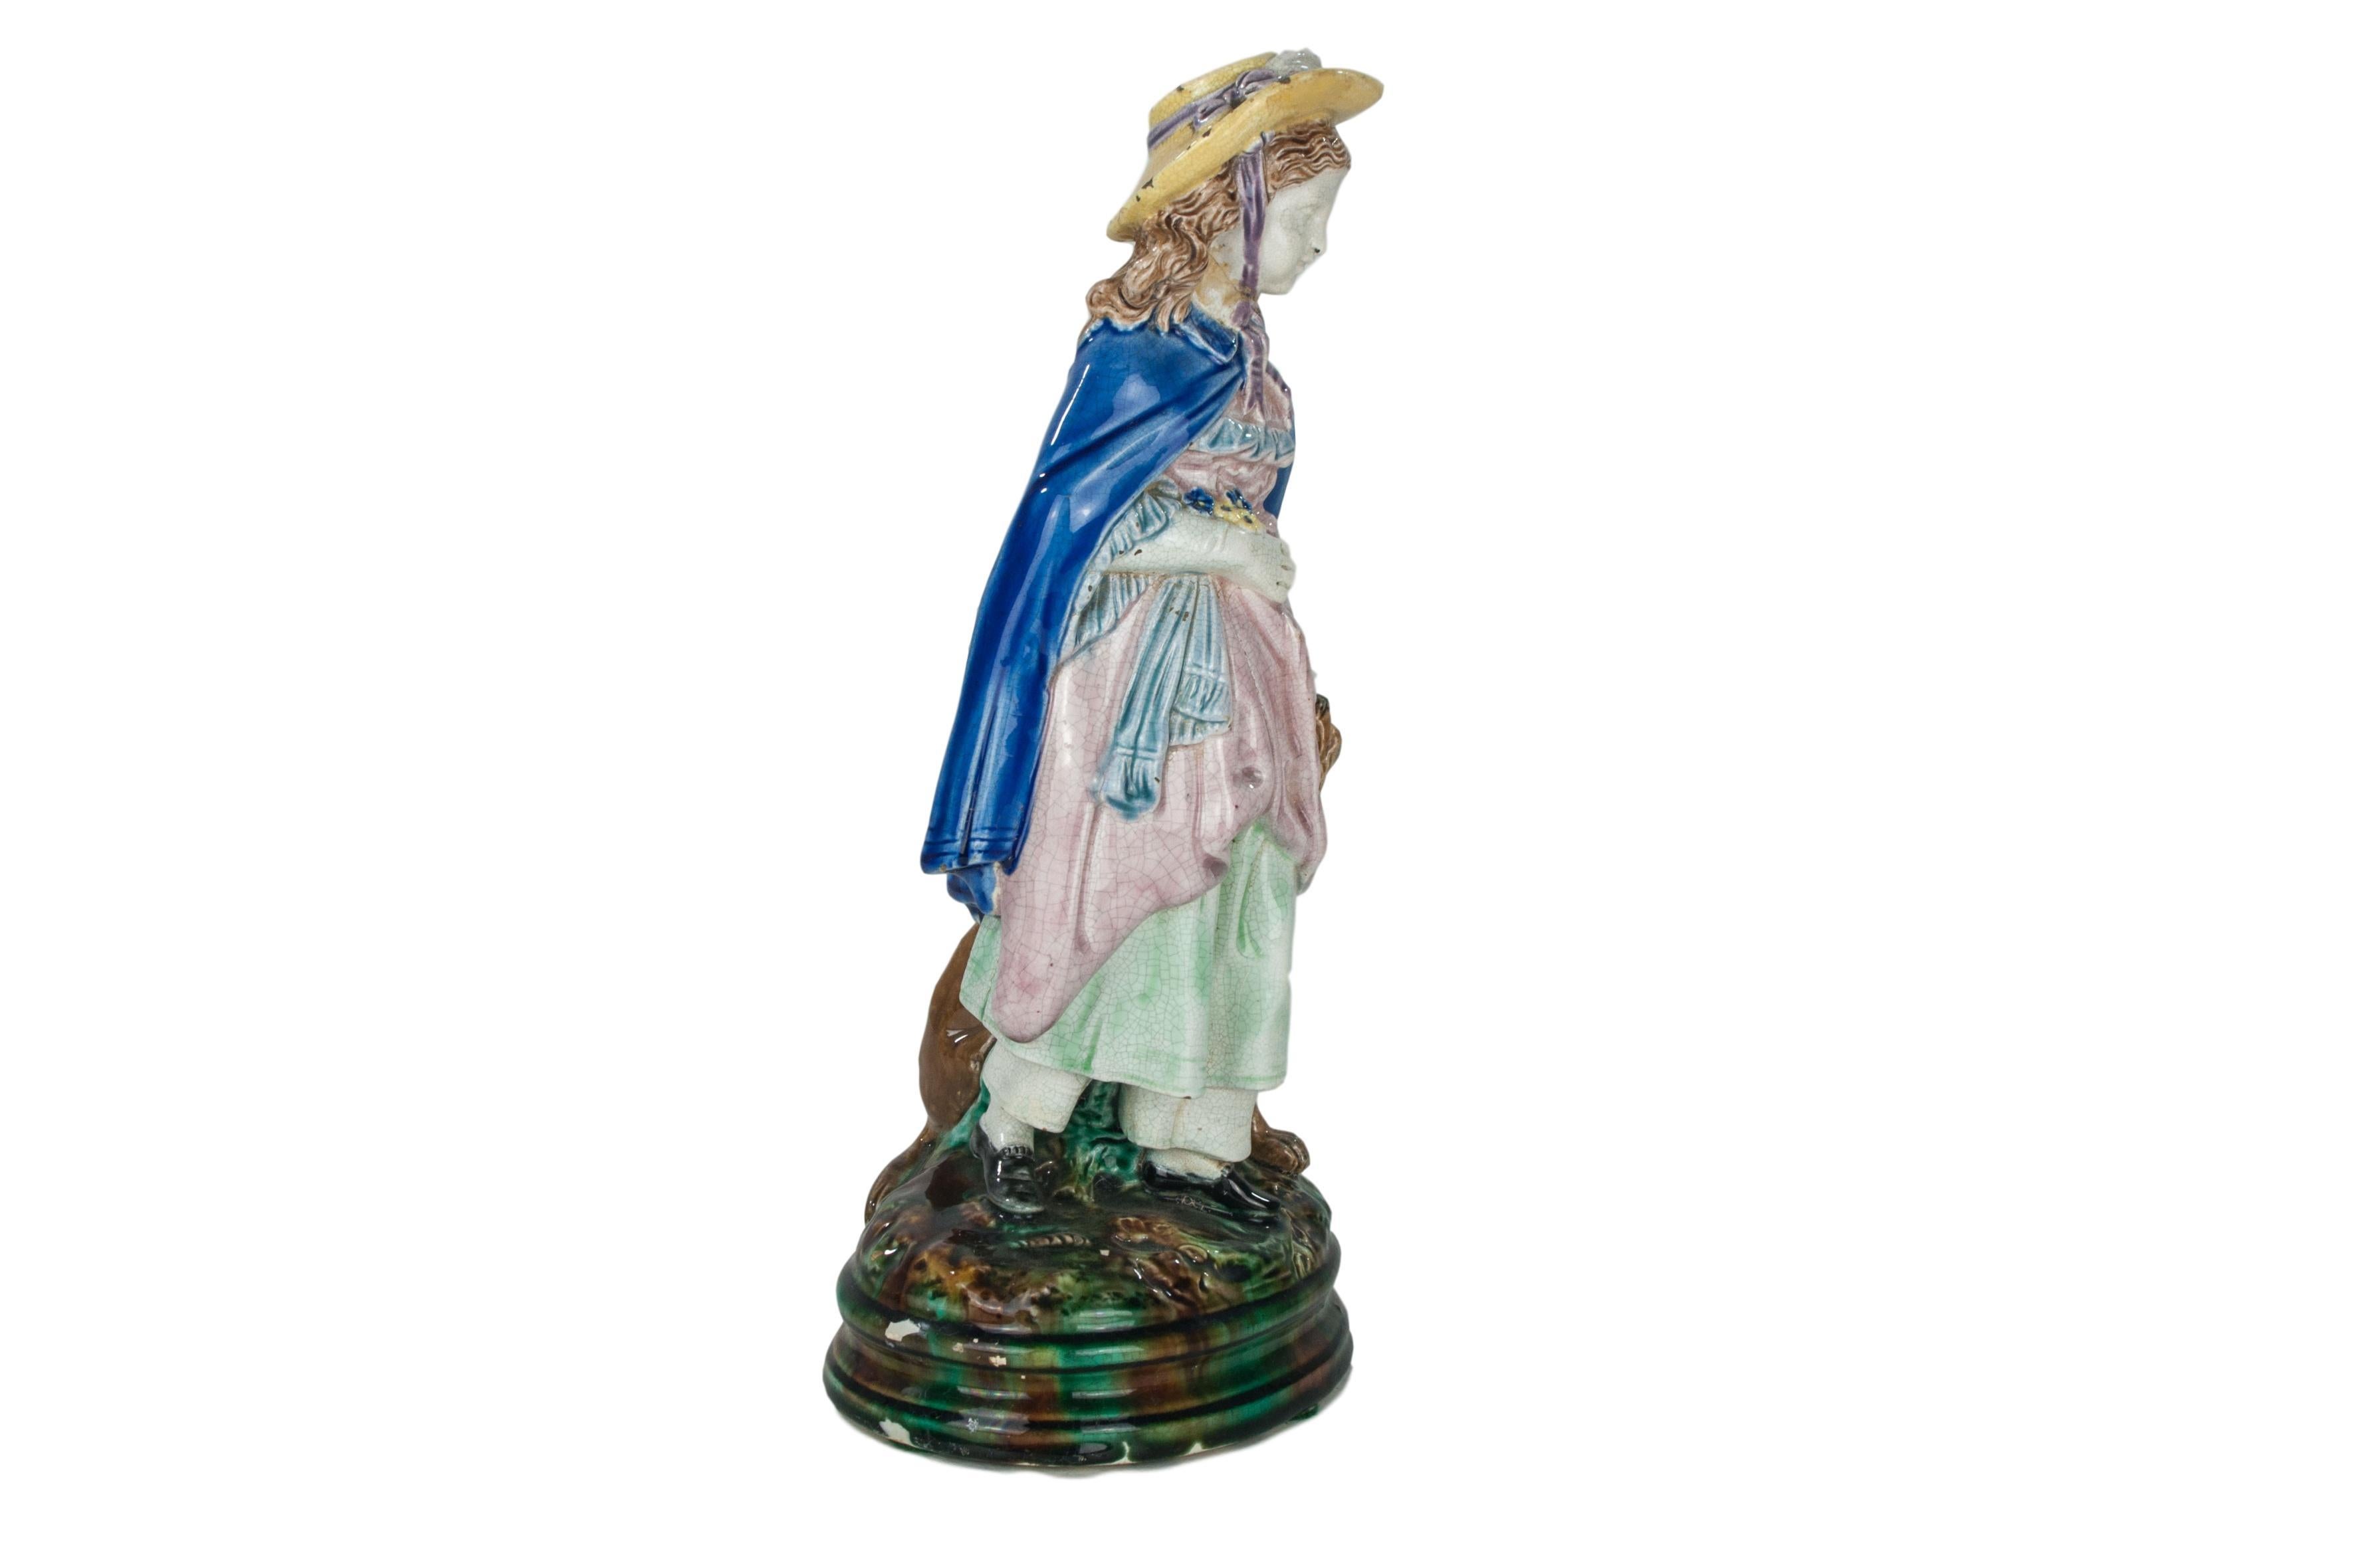  Joseph Holdcroft Majolica Figure of a Little Girl and Dog, English, ca. 1880.  
Good condition with two small chips (pictured) to the rear pedestal base.  
For over 28 years we have been among the nation's preeminent specialists in fine antique